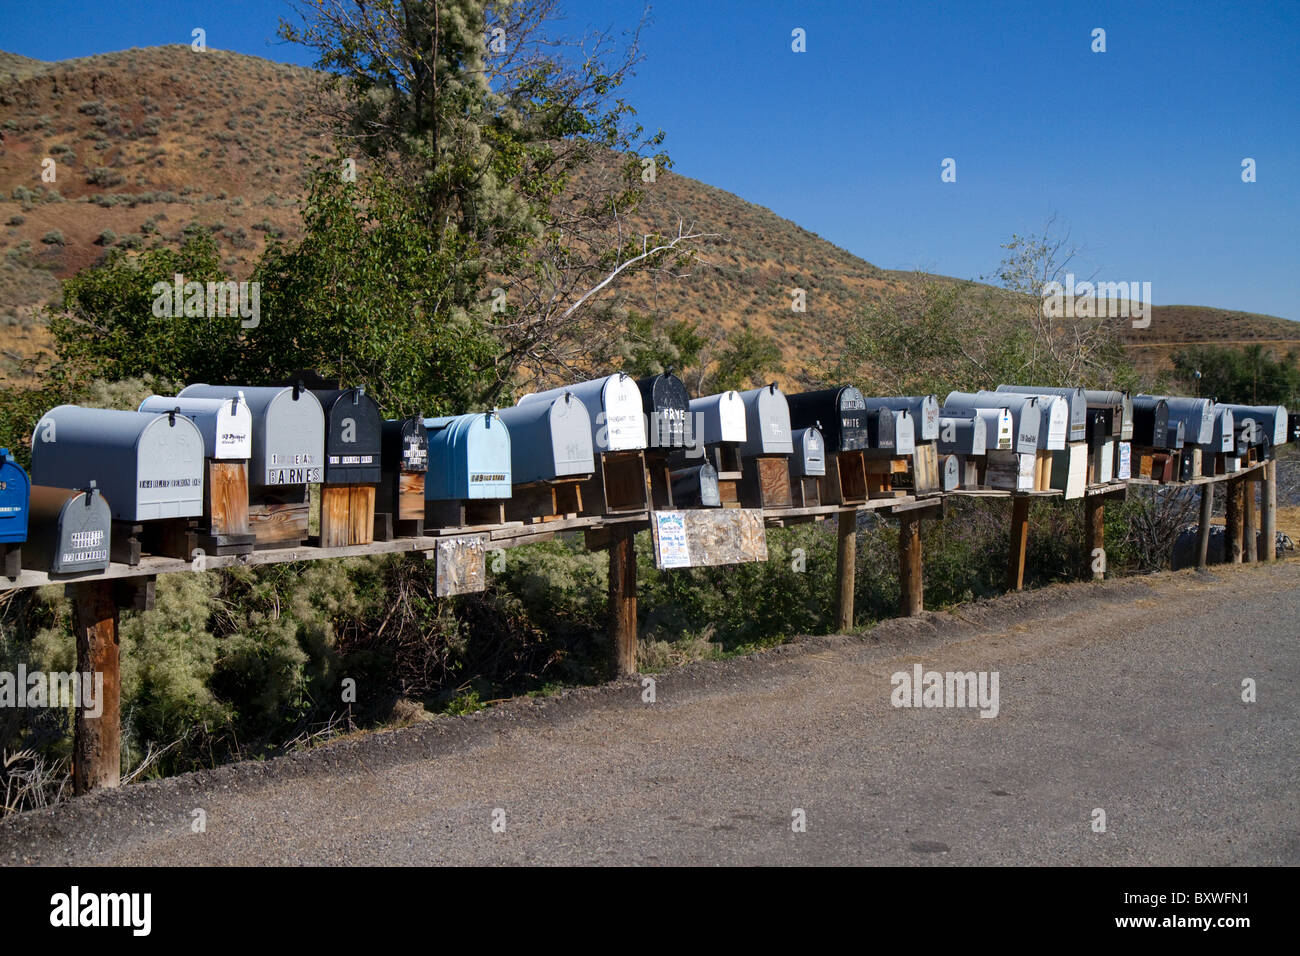 Mailboxes lined up for the delivery of mail in a rural area near Challis, Idaho, USA. Stock Photo